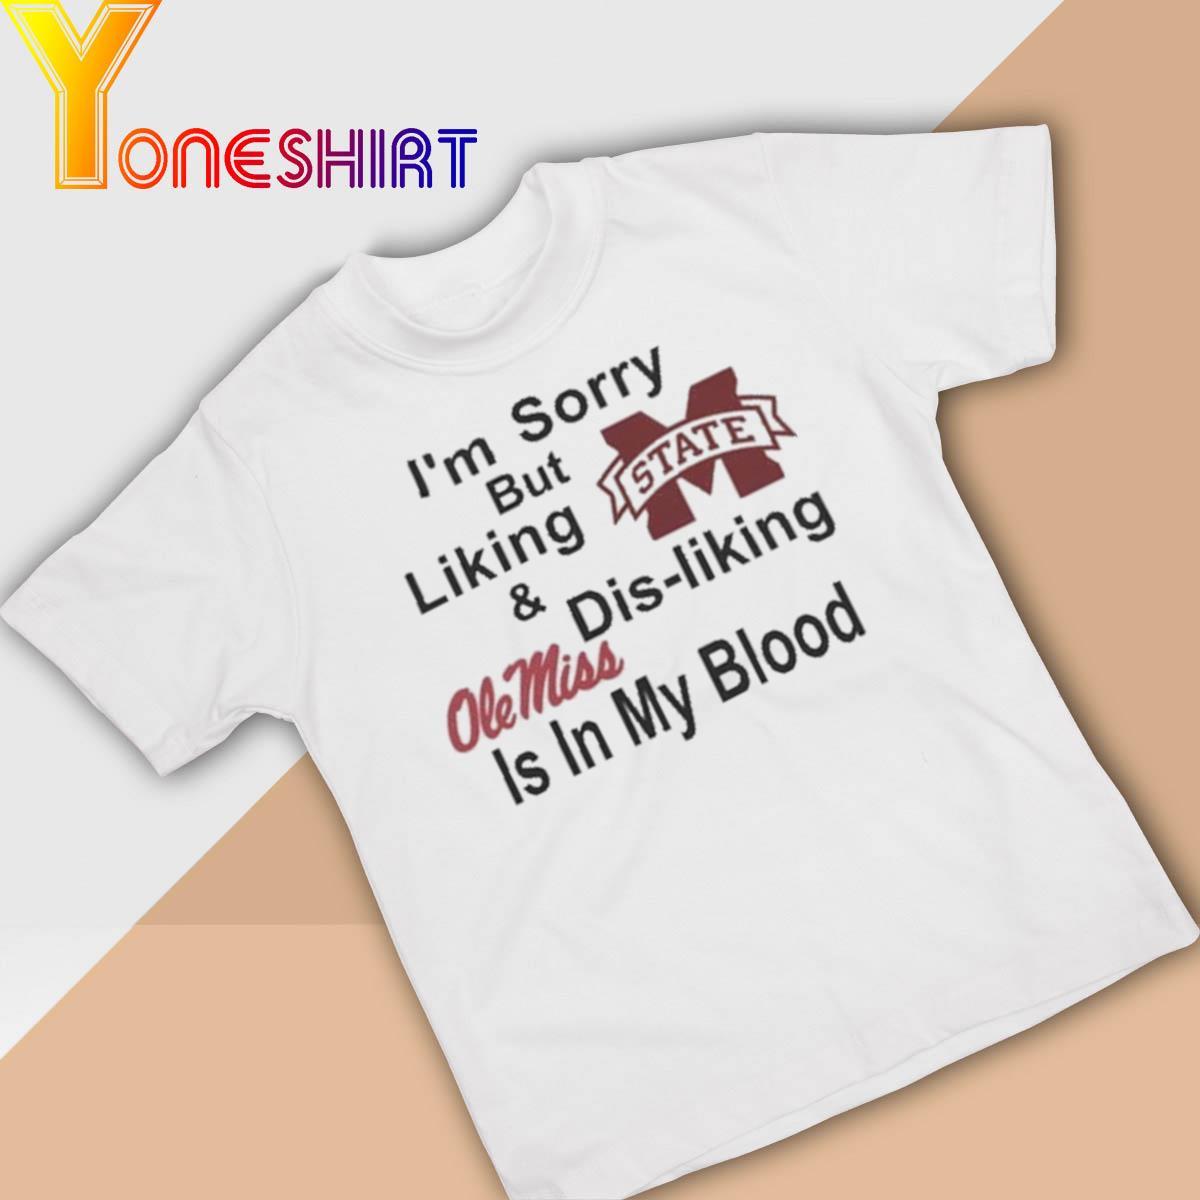 Mississippi State Bulldogs I'm sorry but liking and dis-Liking Ole Miss is in my blood shirt